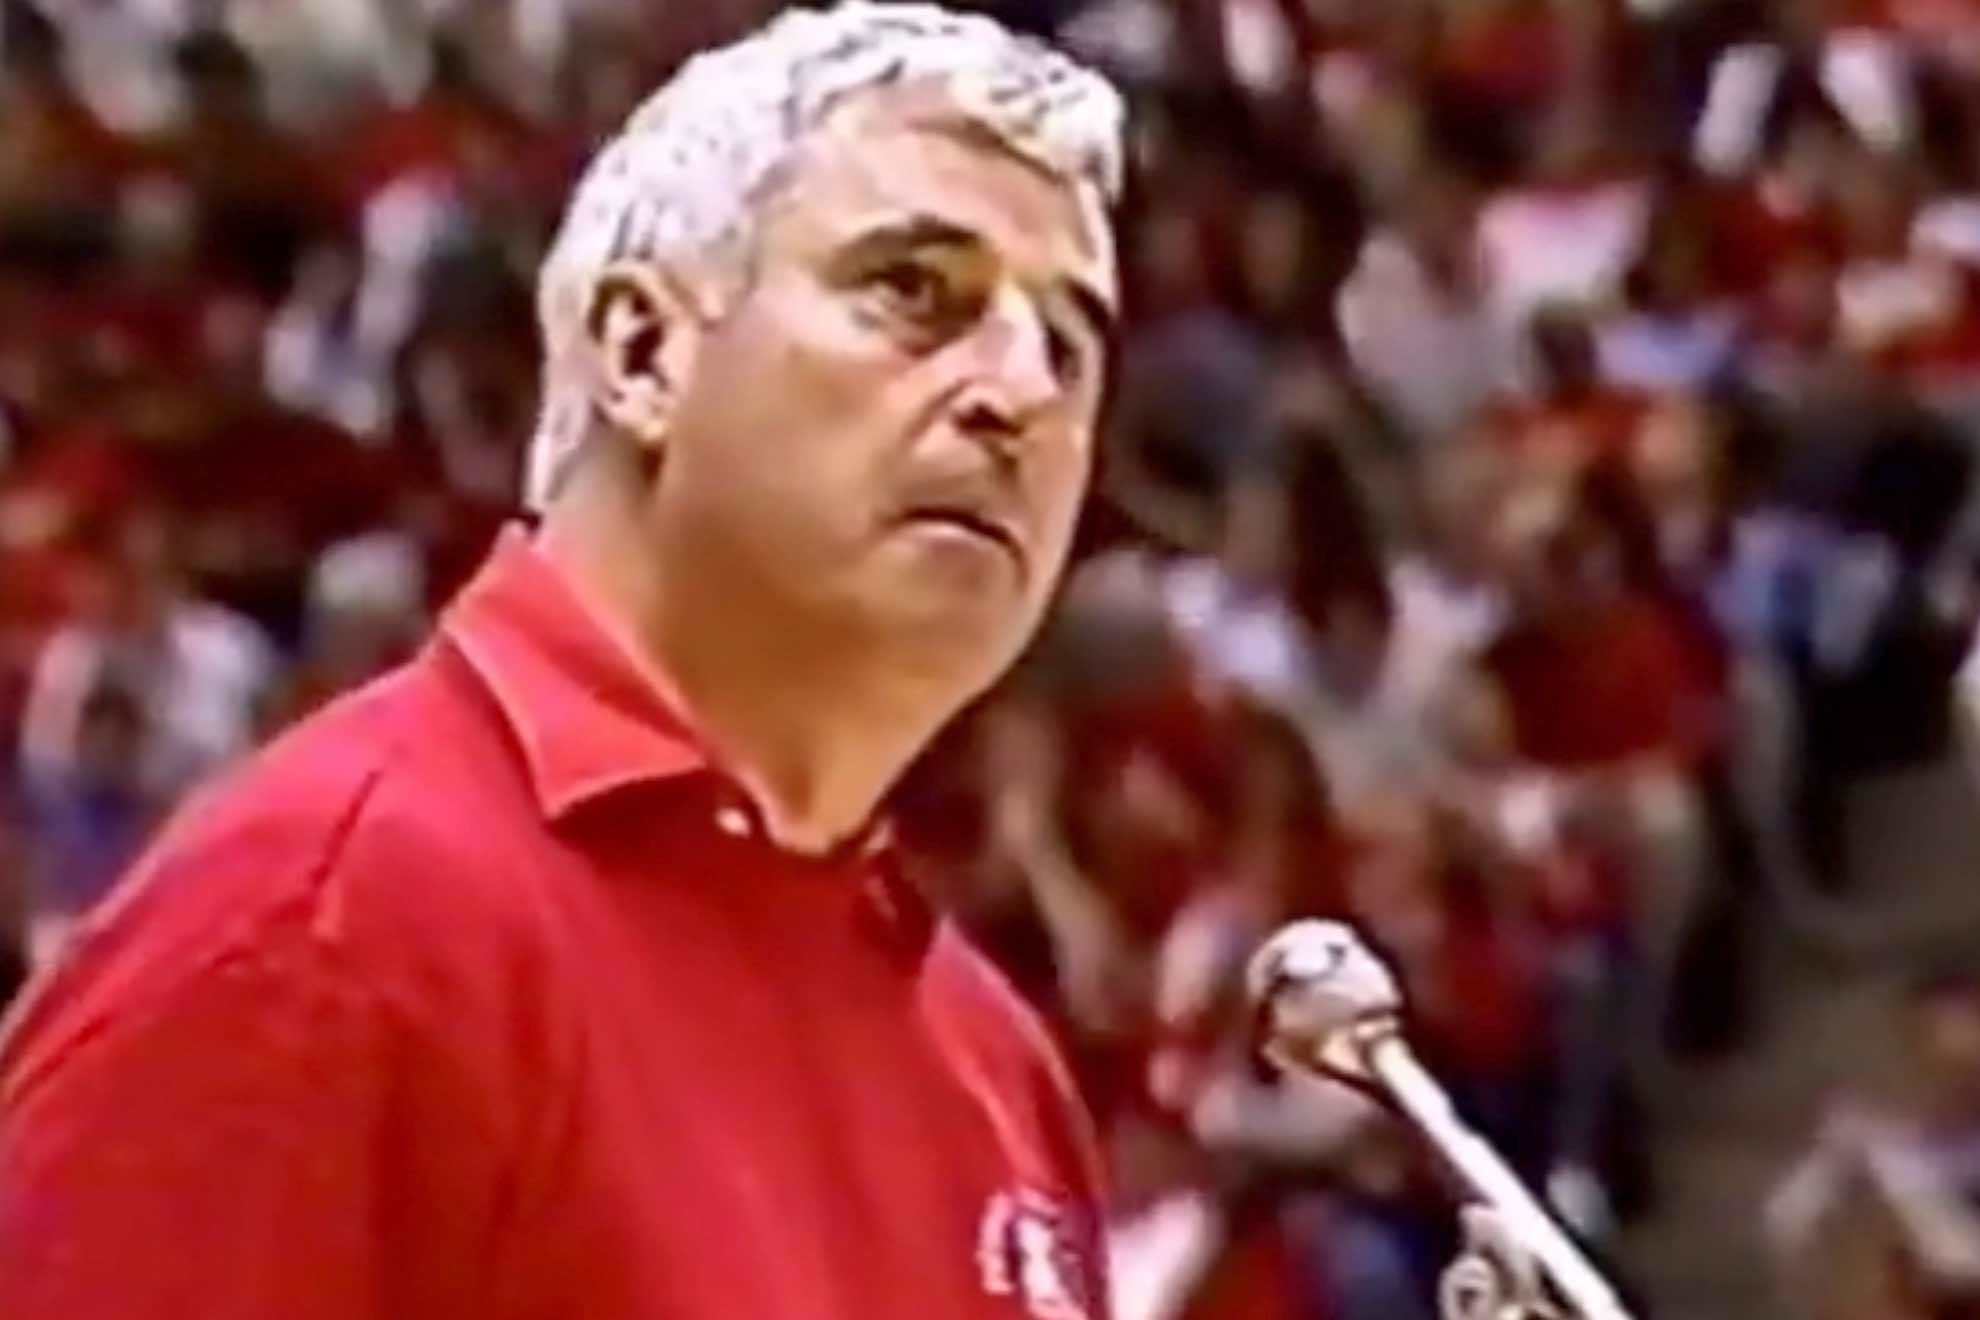 Bob Knight's famous quote that became more relevant after his death: "When my time on earth is gone..."